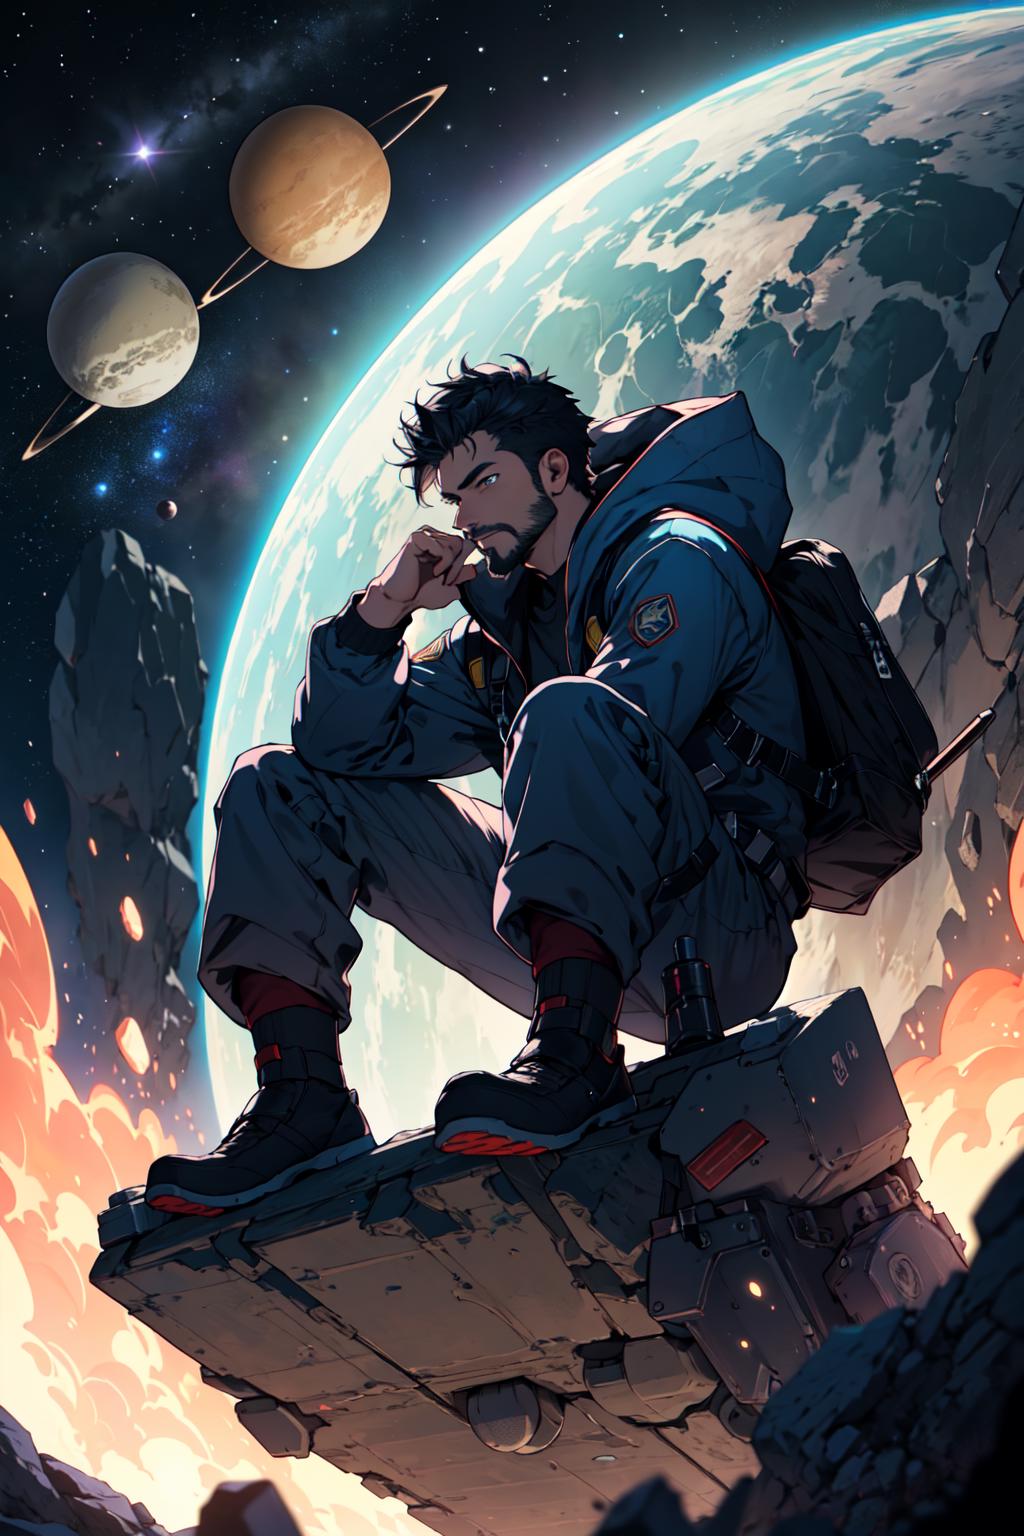 The man with a beard and a backpack sits on a rock, looking up at the planets.